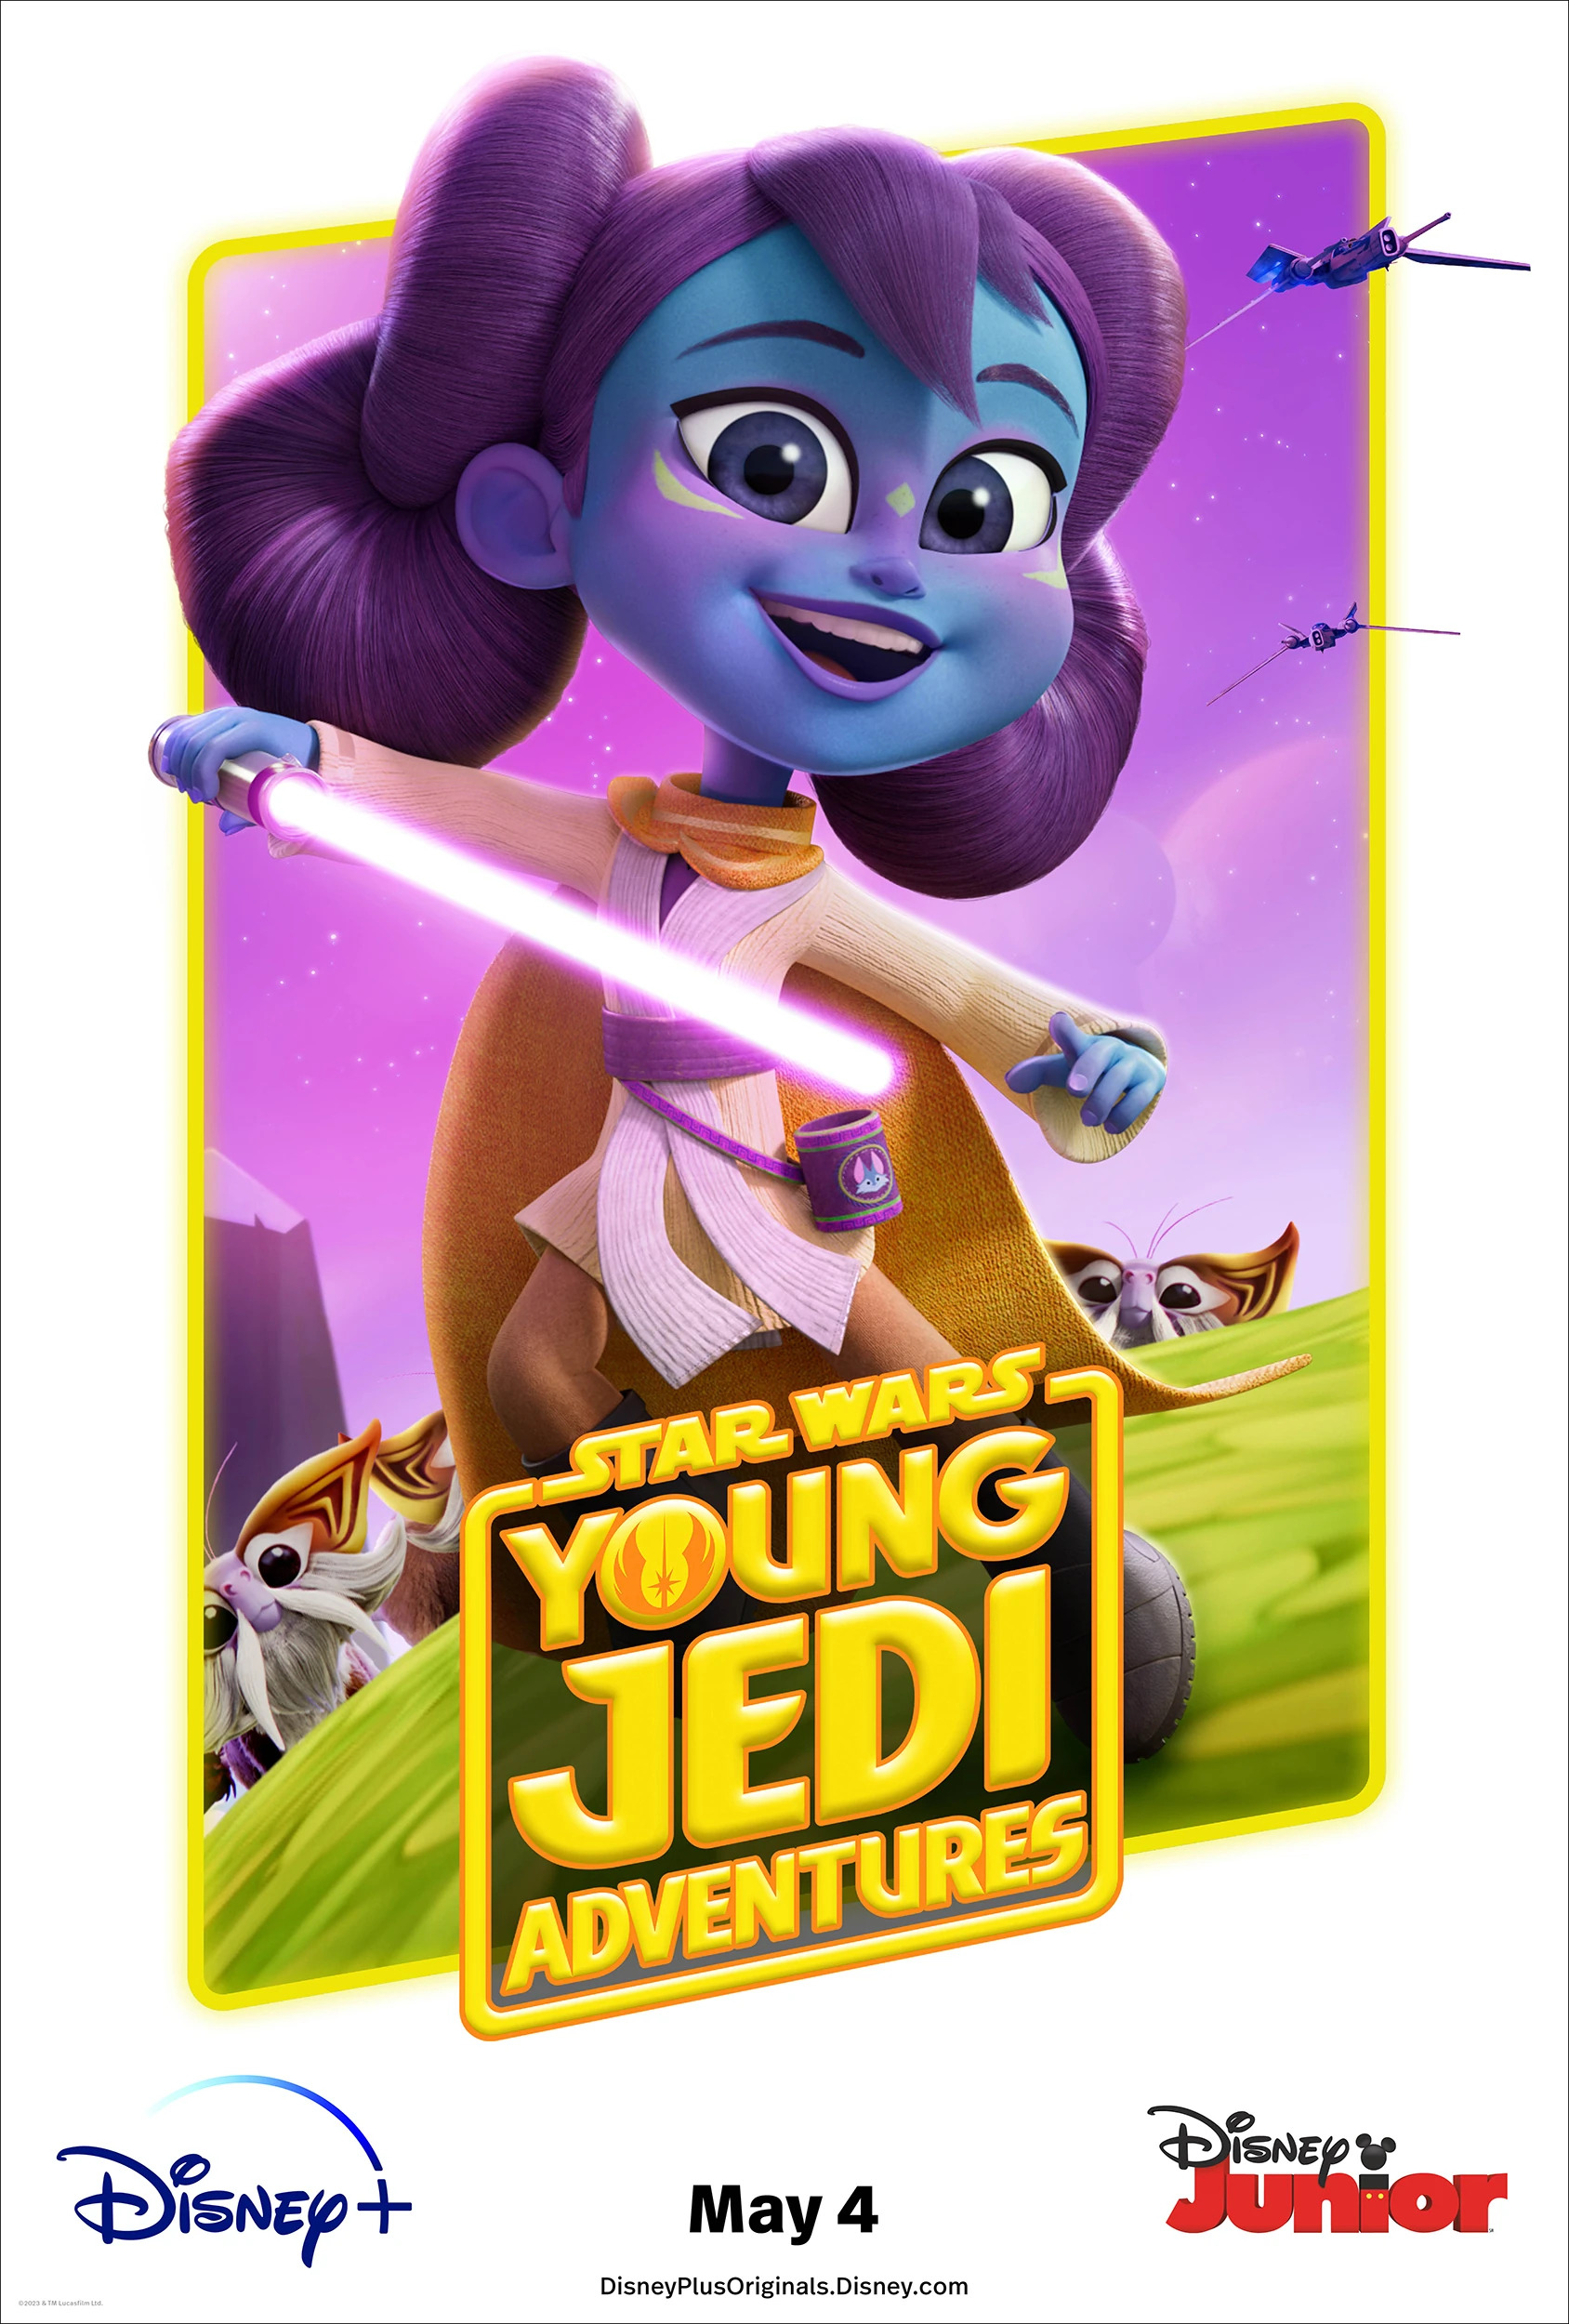 Mega Sized Movie Poster Image for Star Wars: Young Jedi Adventures (#6 of 6)